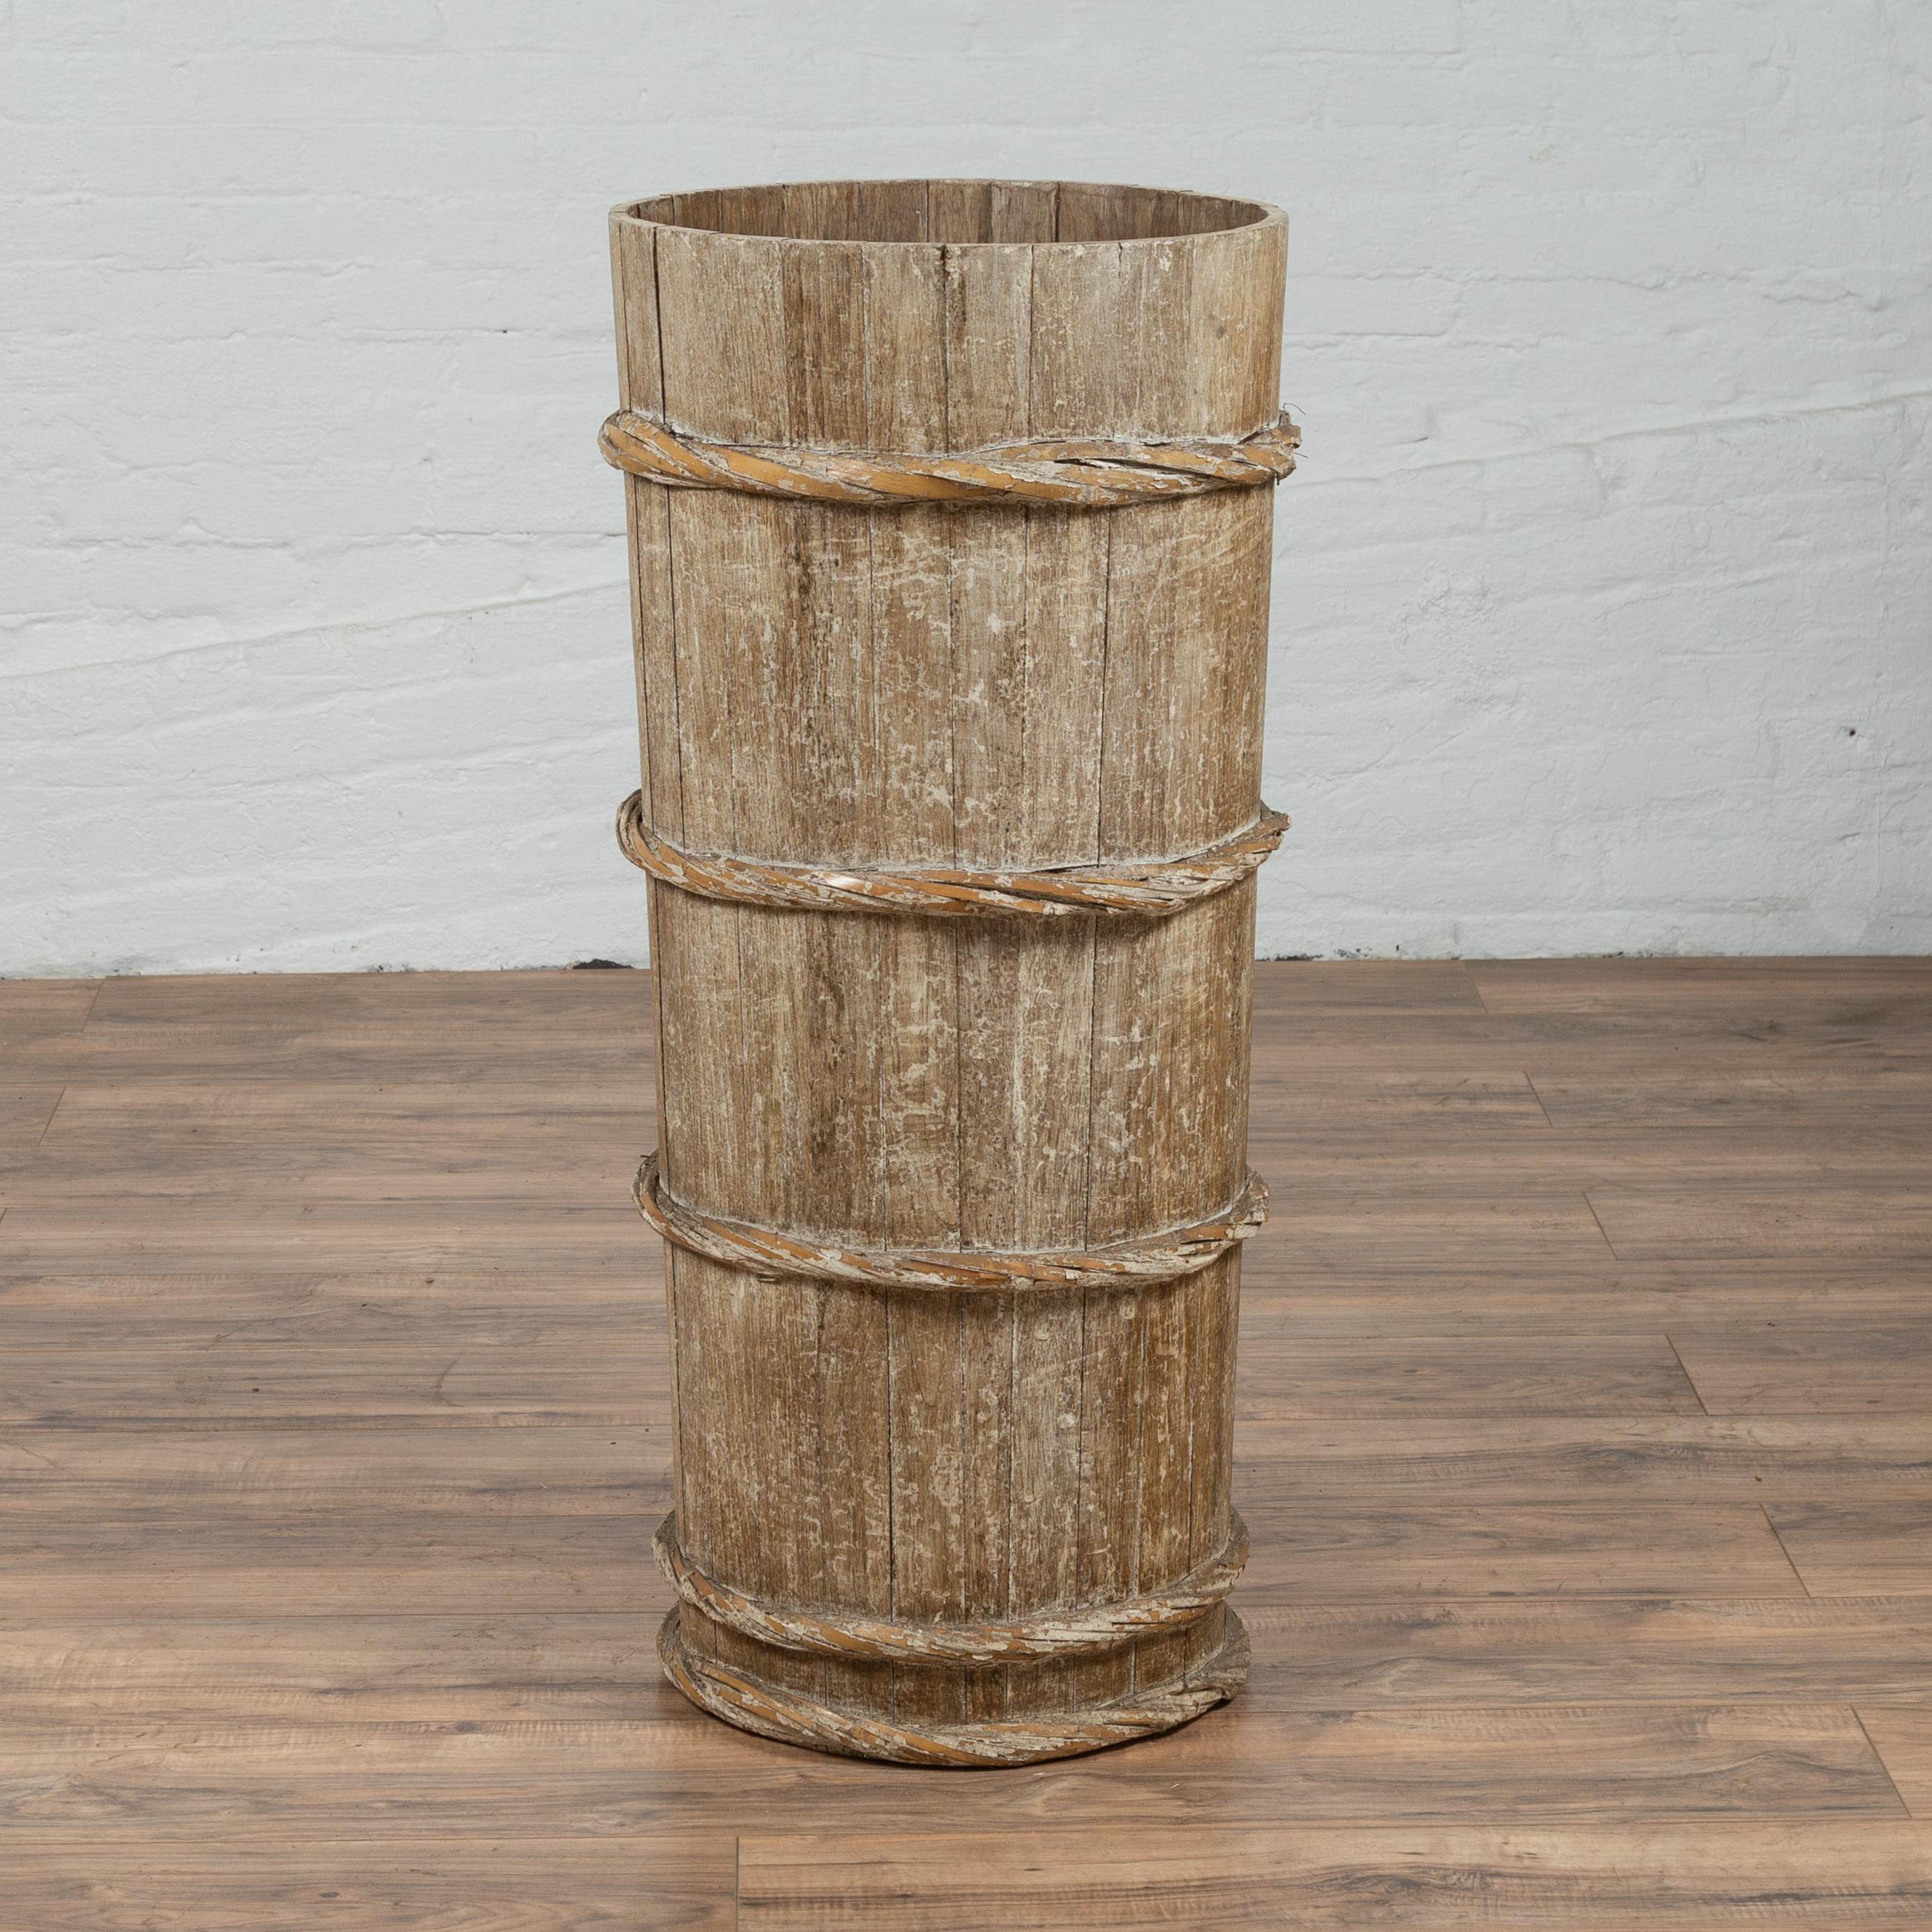 Tall Vintage Rustic Wooden Barrel with Slatted Body and Rope-Style Motifs In Good Condition For Sale In Yonkers, NY